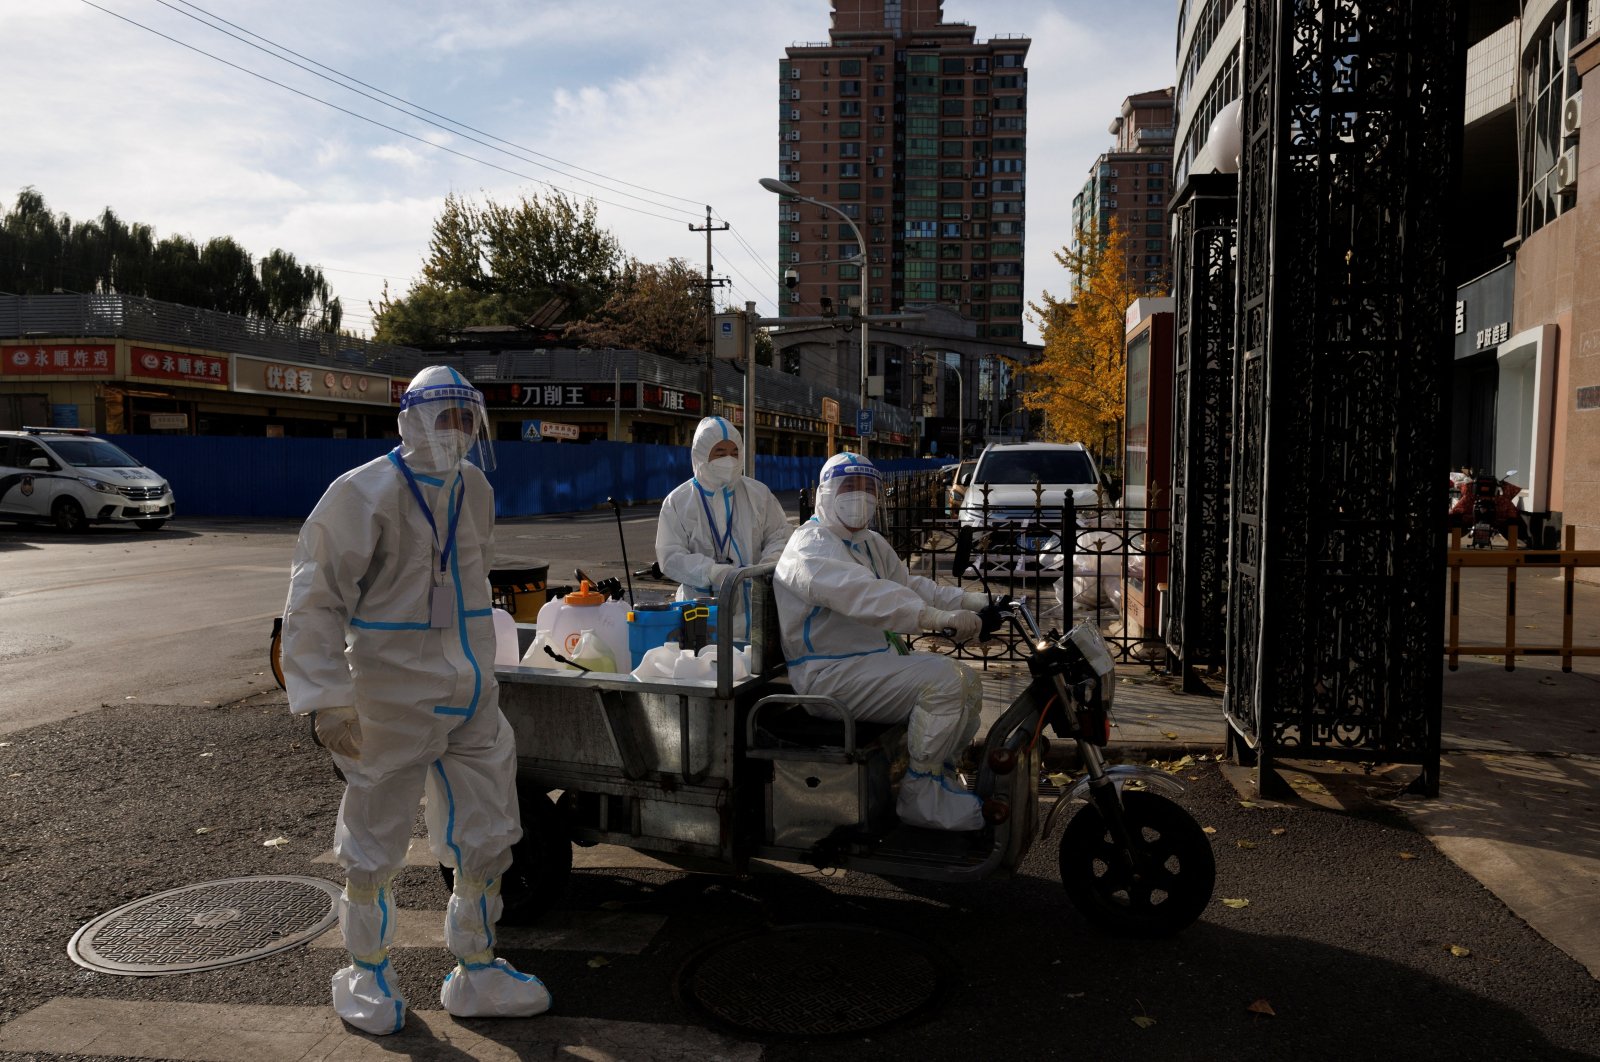 Pandemic prevention workers in protective suits enter an apartment compound that was placed under lockdown as outbreaks of COVID-19 continue in Beijing, China, Nov. 12, 2022. (Reuters Photo)